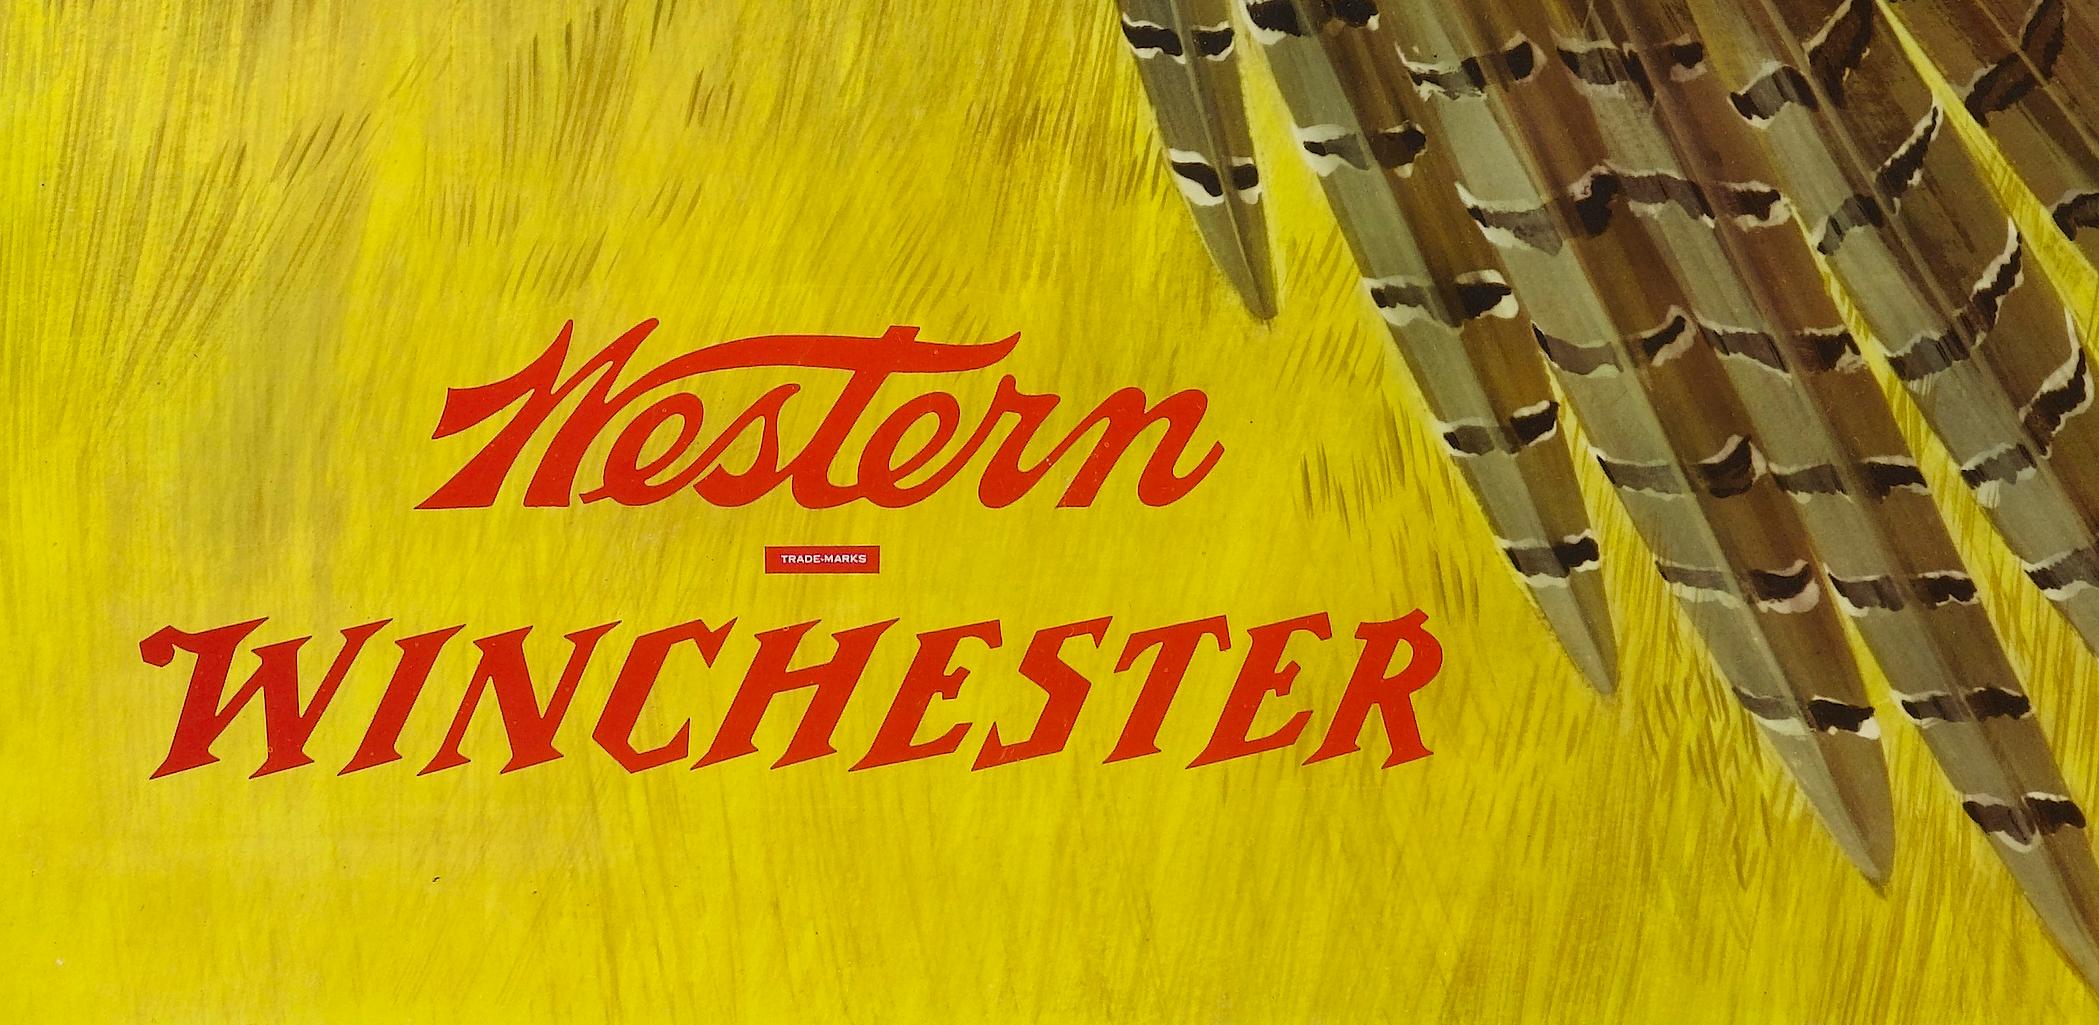 vintage winchester posters